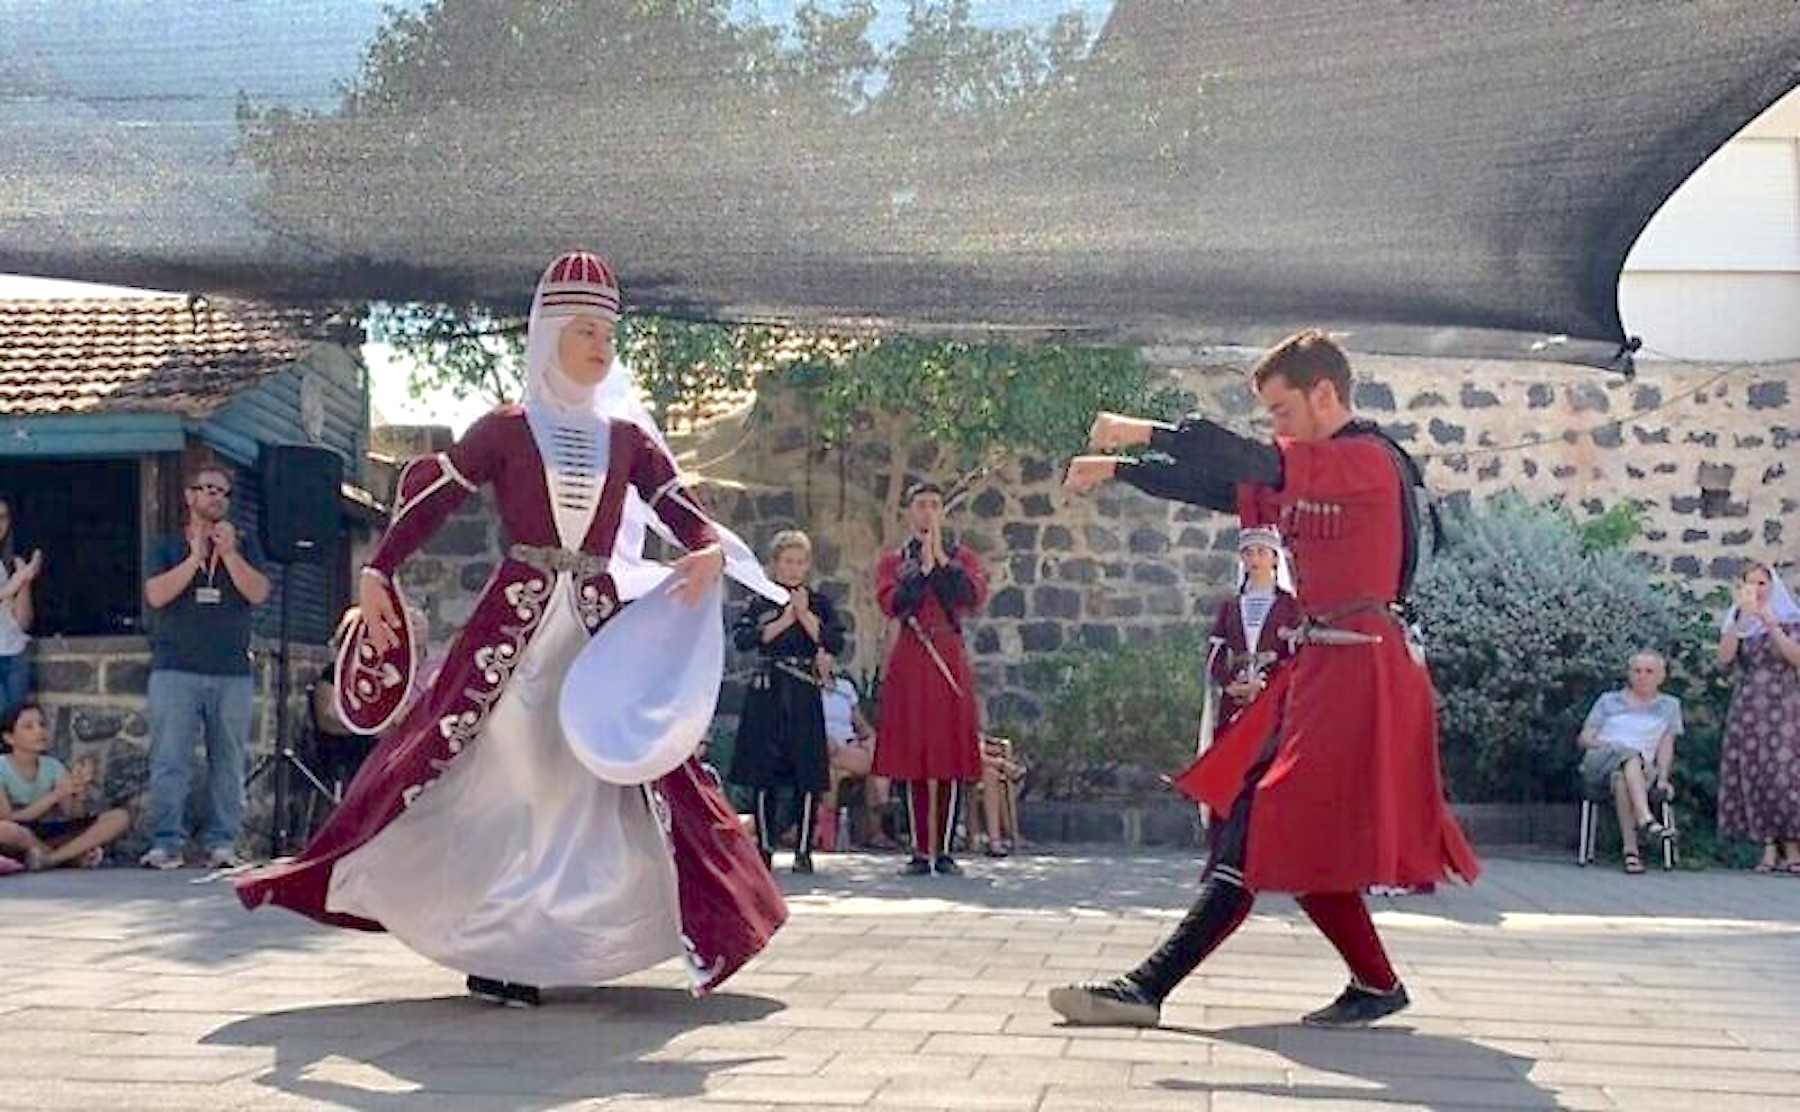 Circassian community in Israel recognized by UN as ‘tourism village’